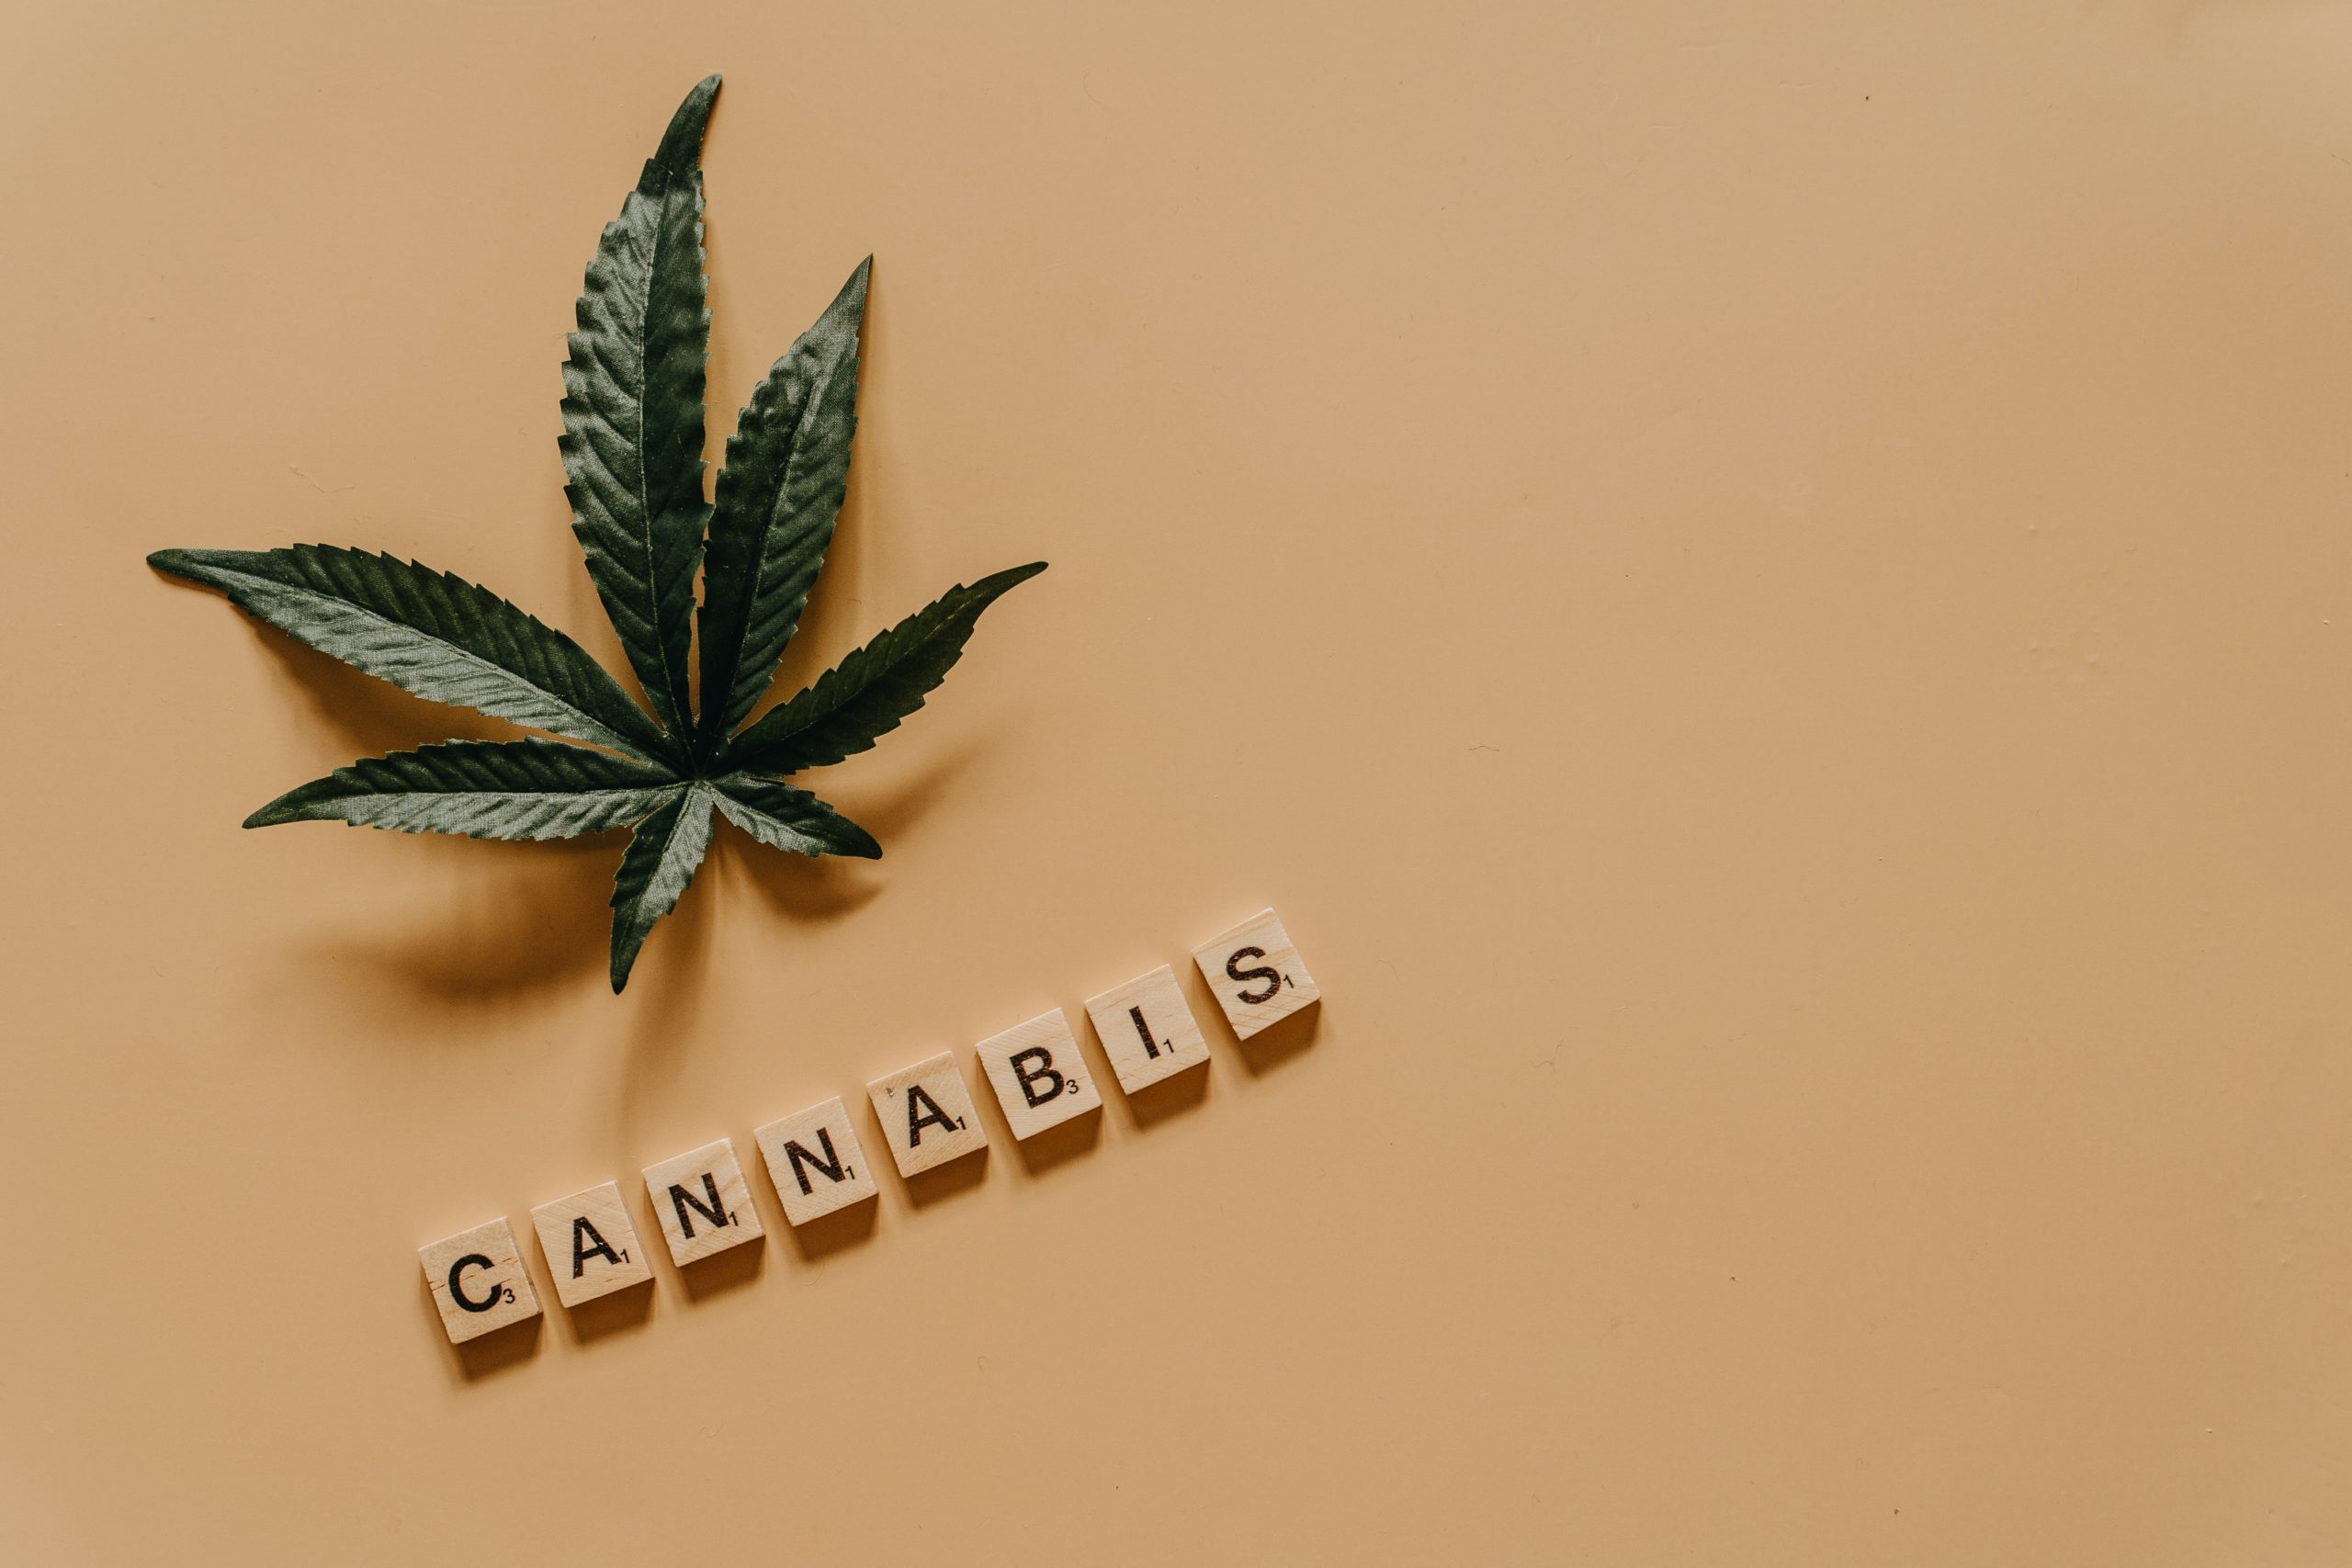 Cannabis image representing increase in use, social acceptability and legal sourcing of cannabis in Canada